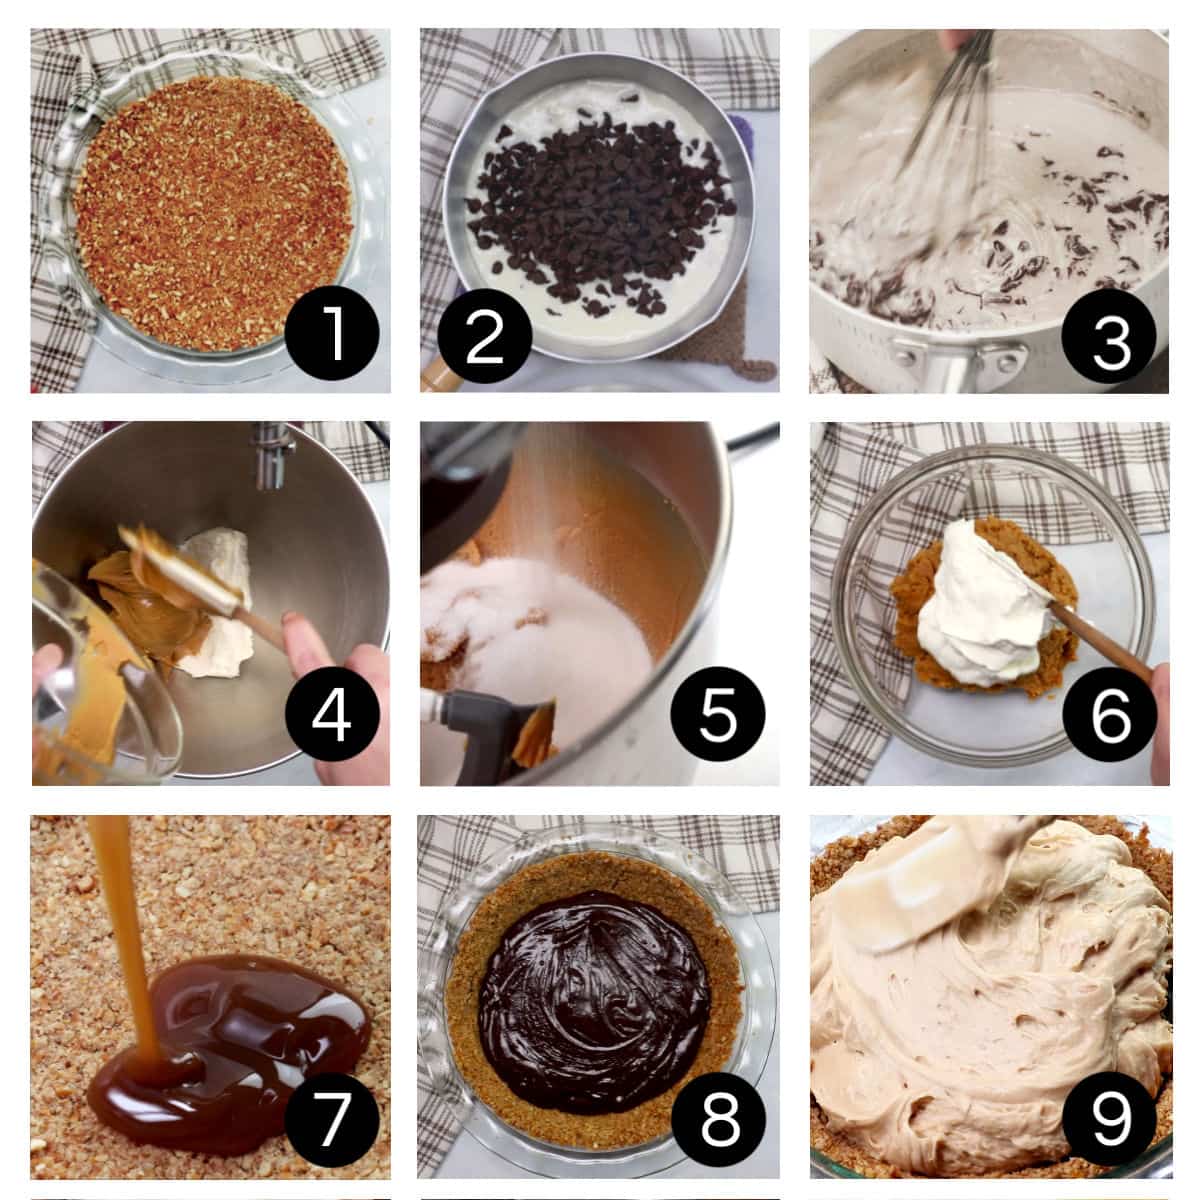 Step by step images showing how to make this chocolate peanut butter pie.